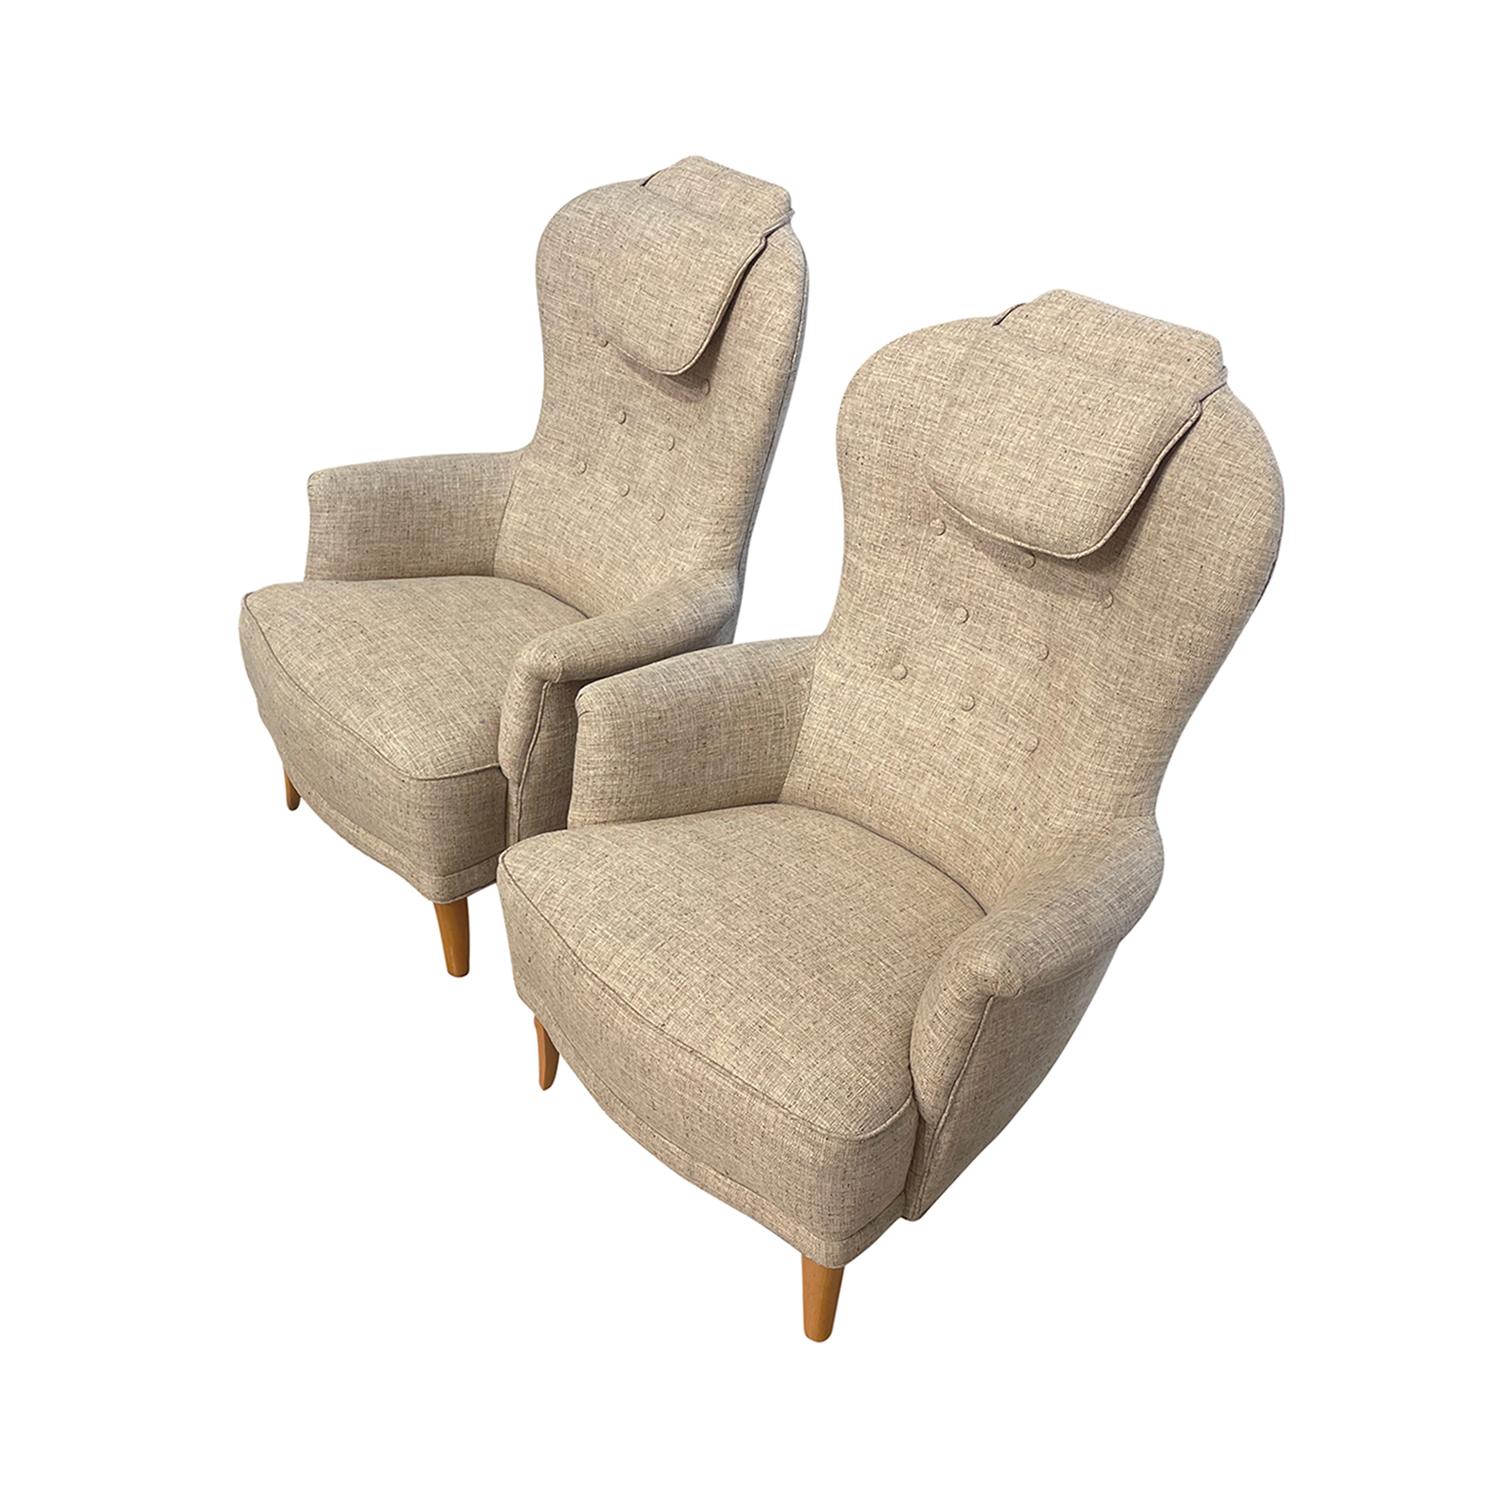 20th Century Swedish Pair of Vintage O.H. Sjögren Armchairs by Carl Malmsten In Good Condition For Sale In West Palm Beach, FL